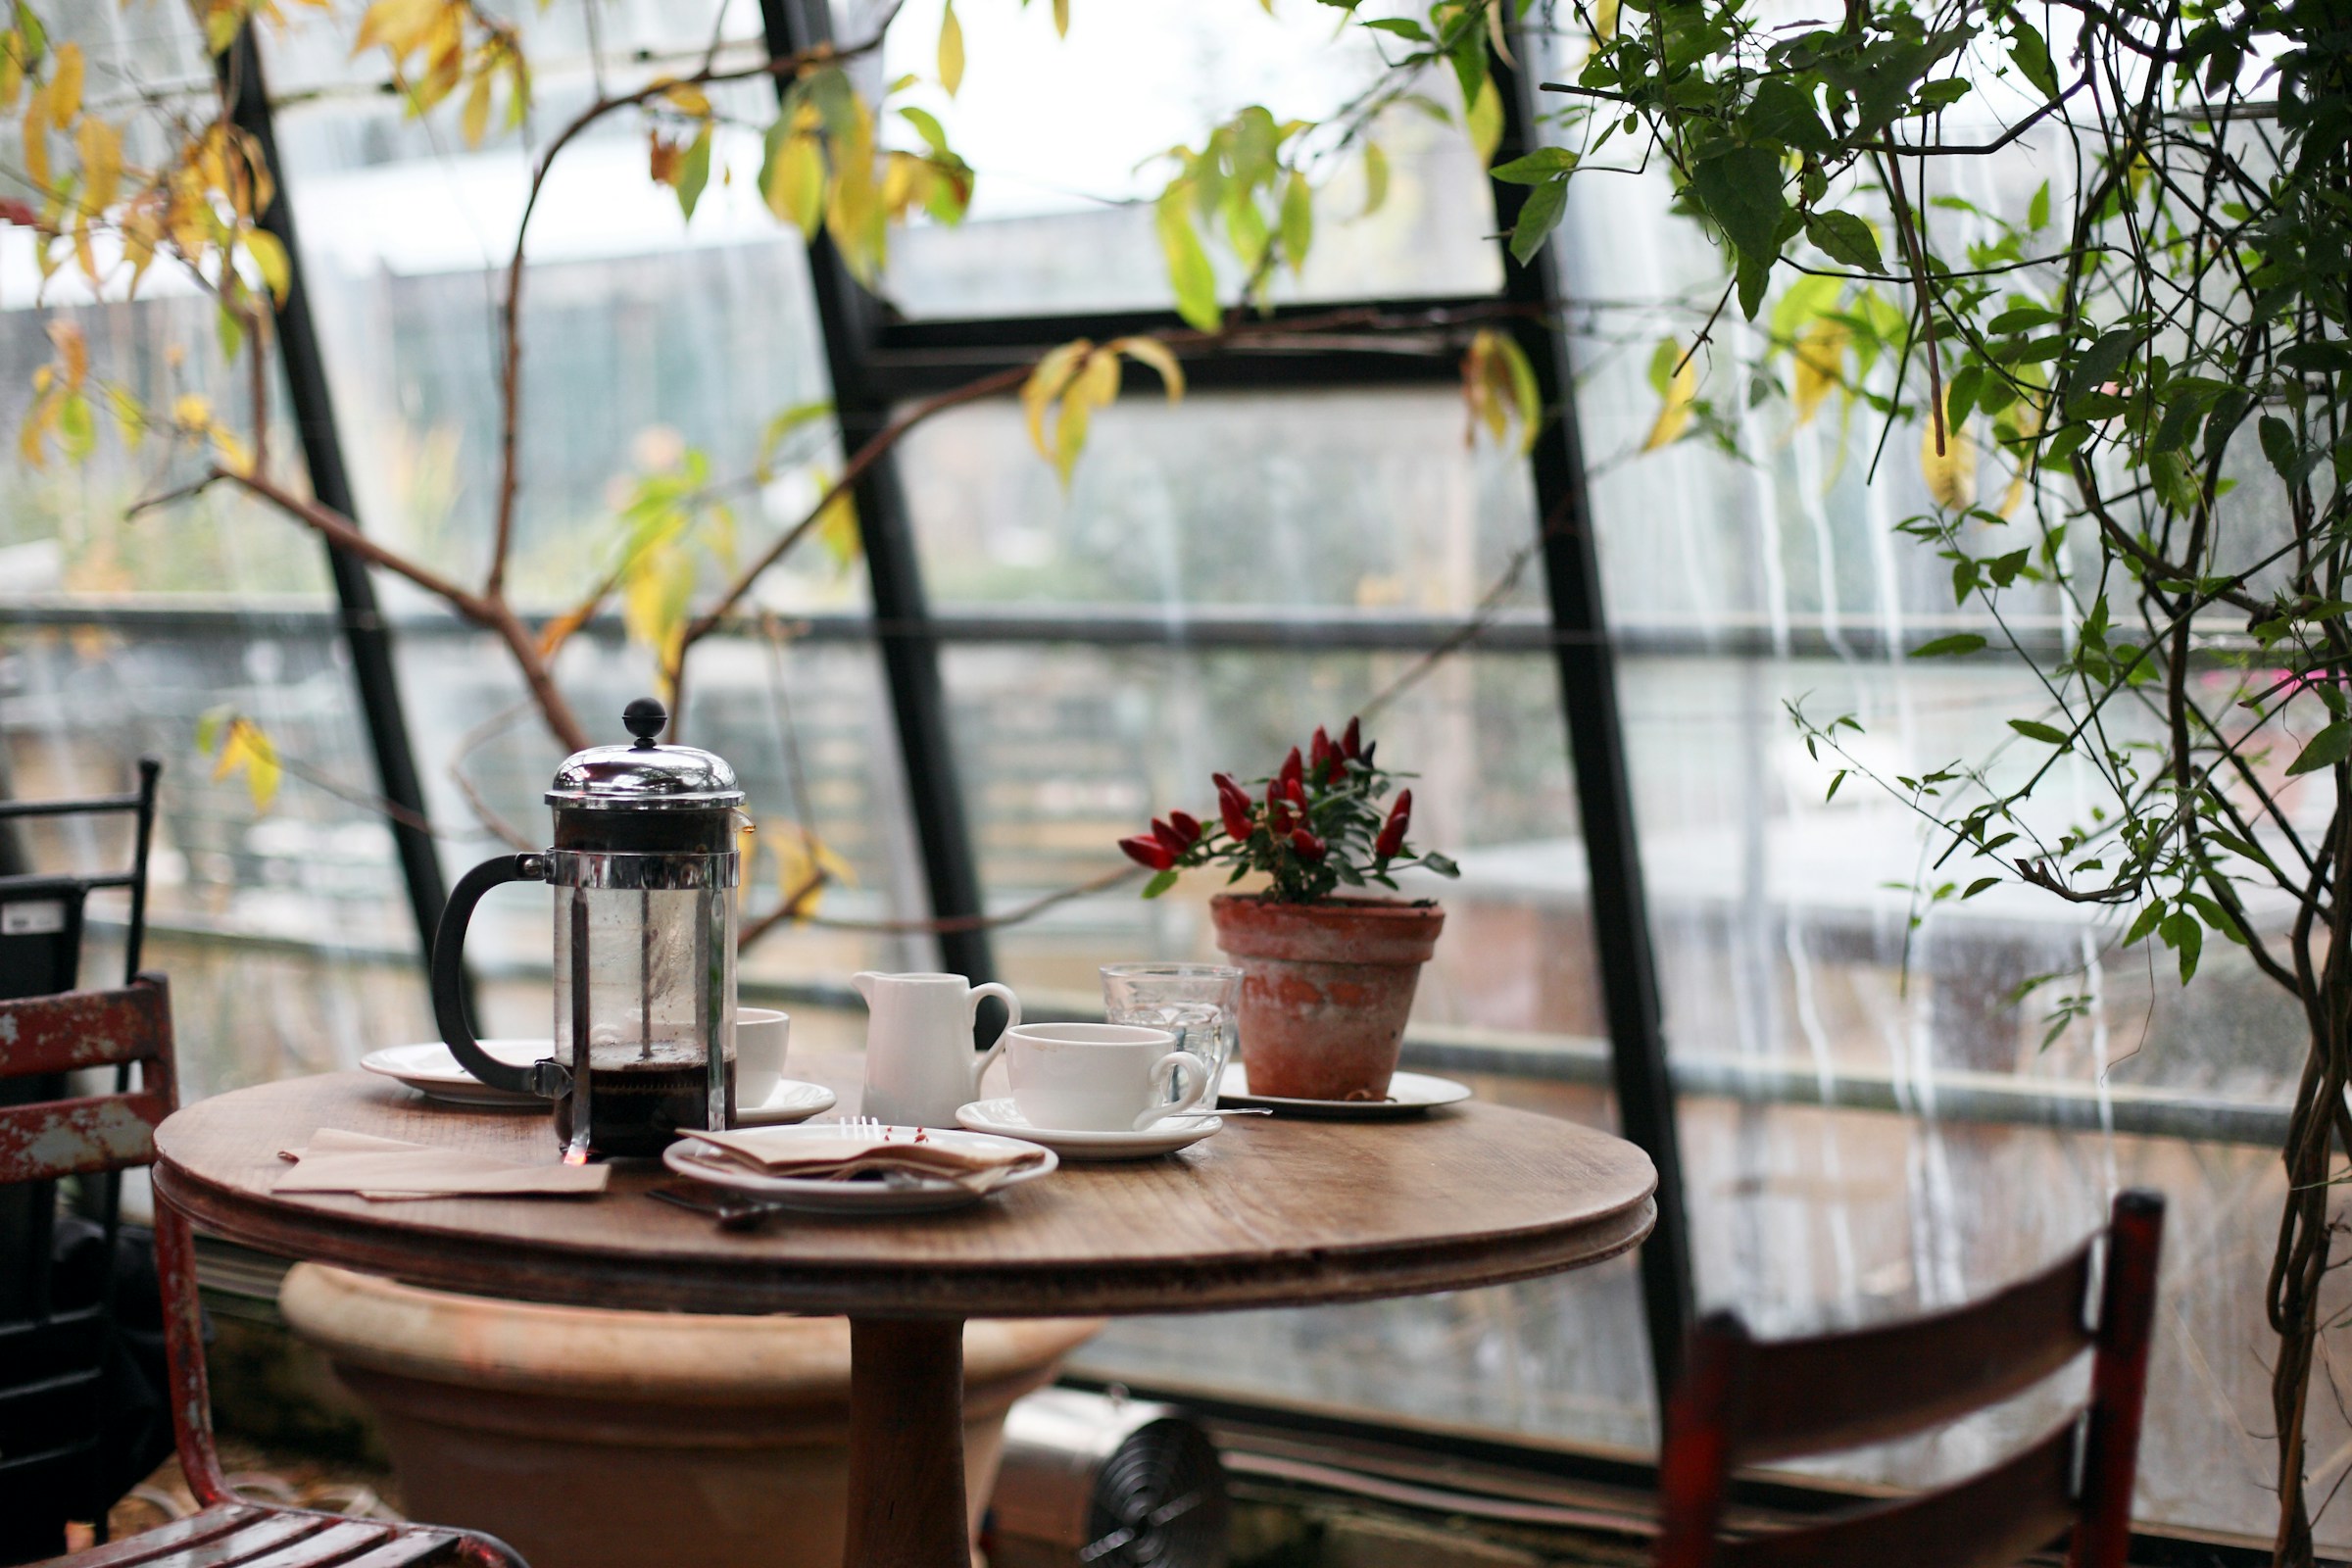 A table in a coffee shop | Source: Unsplash